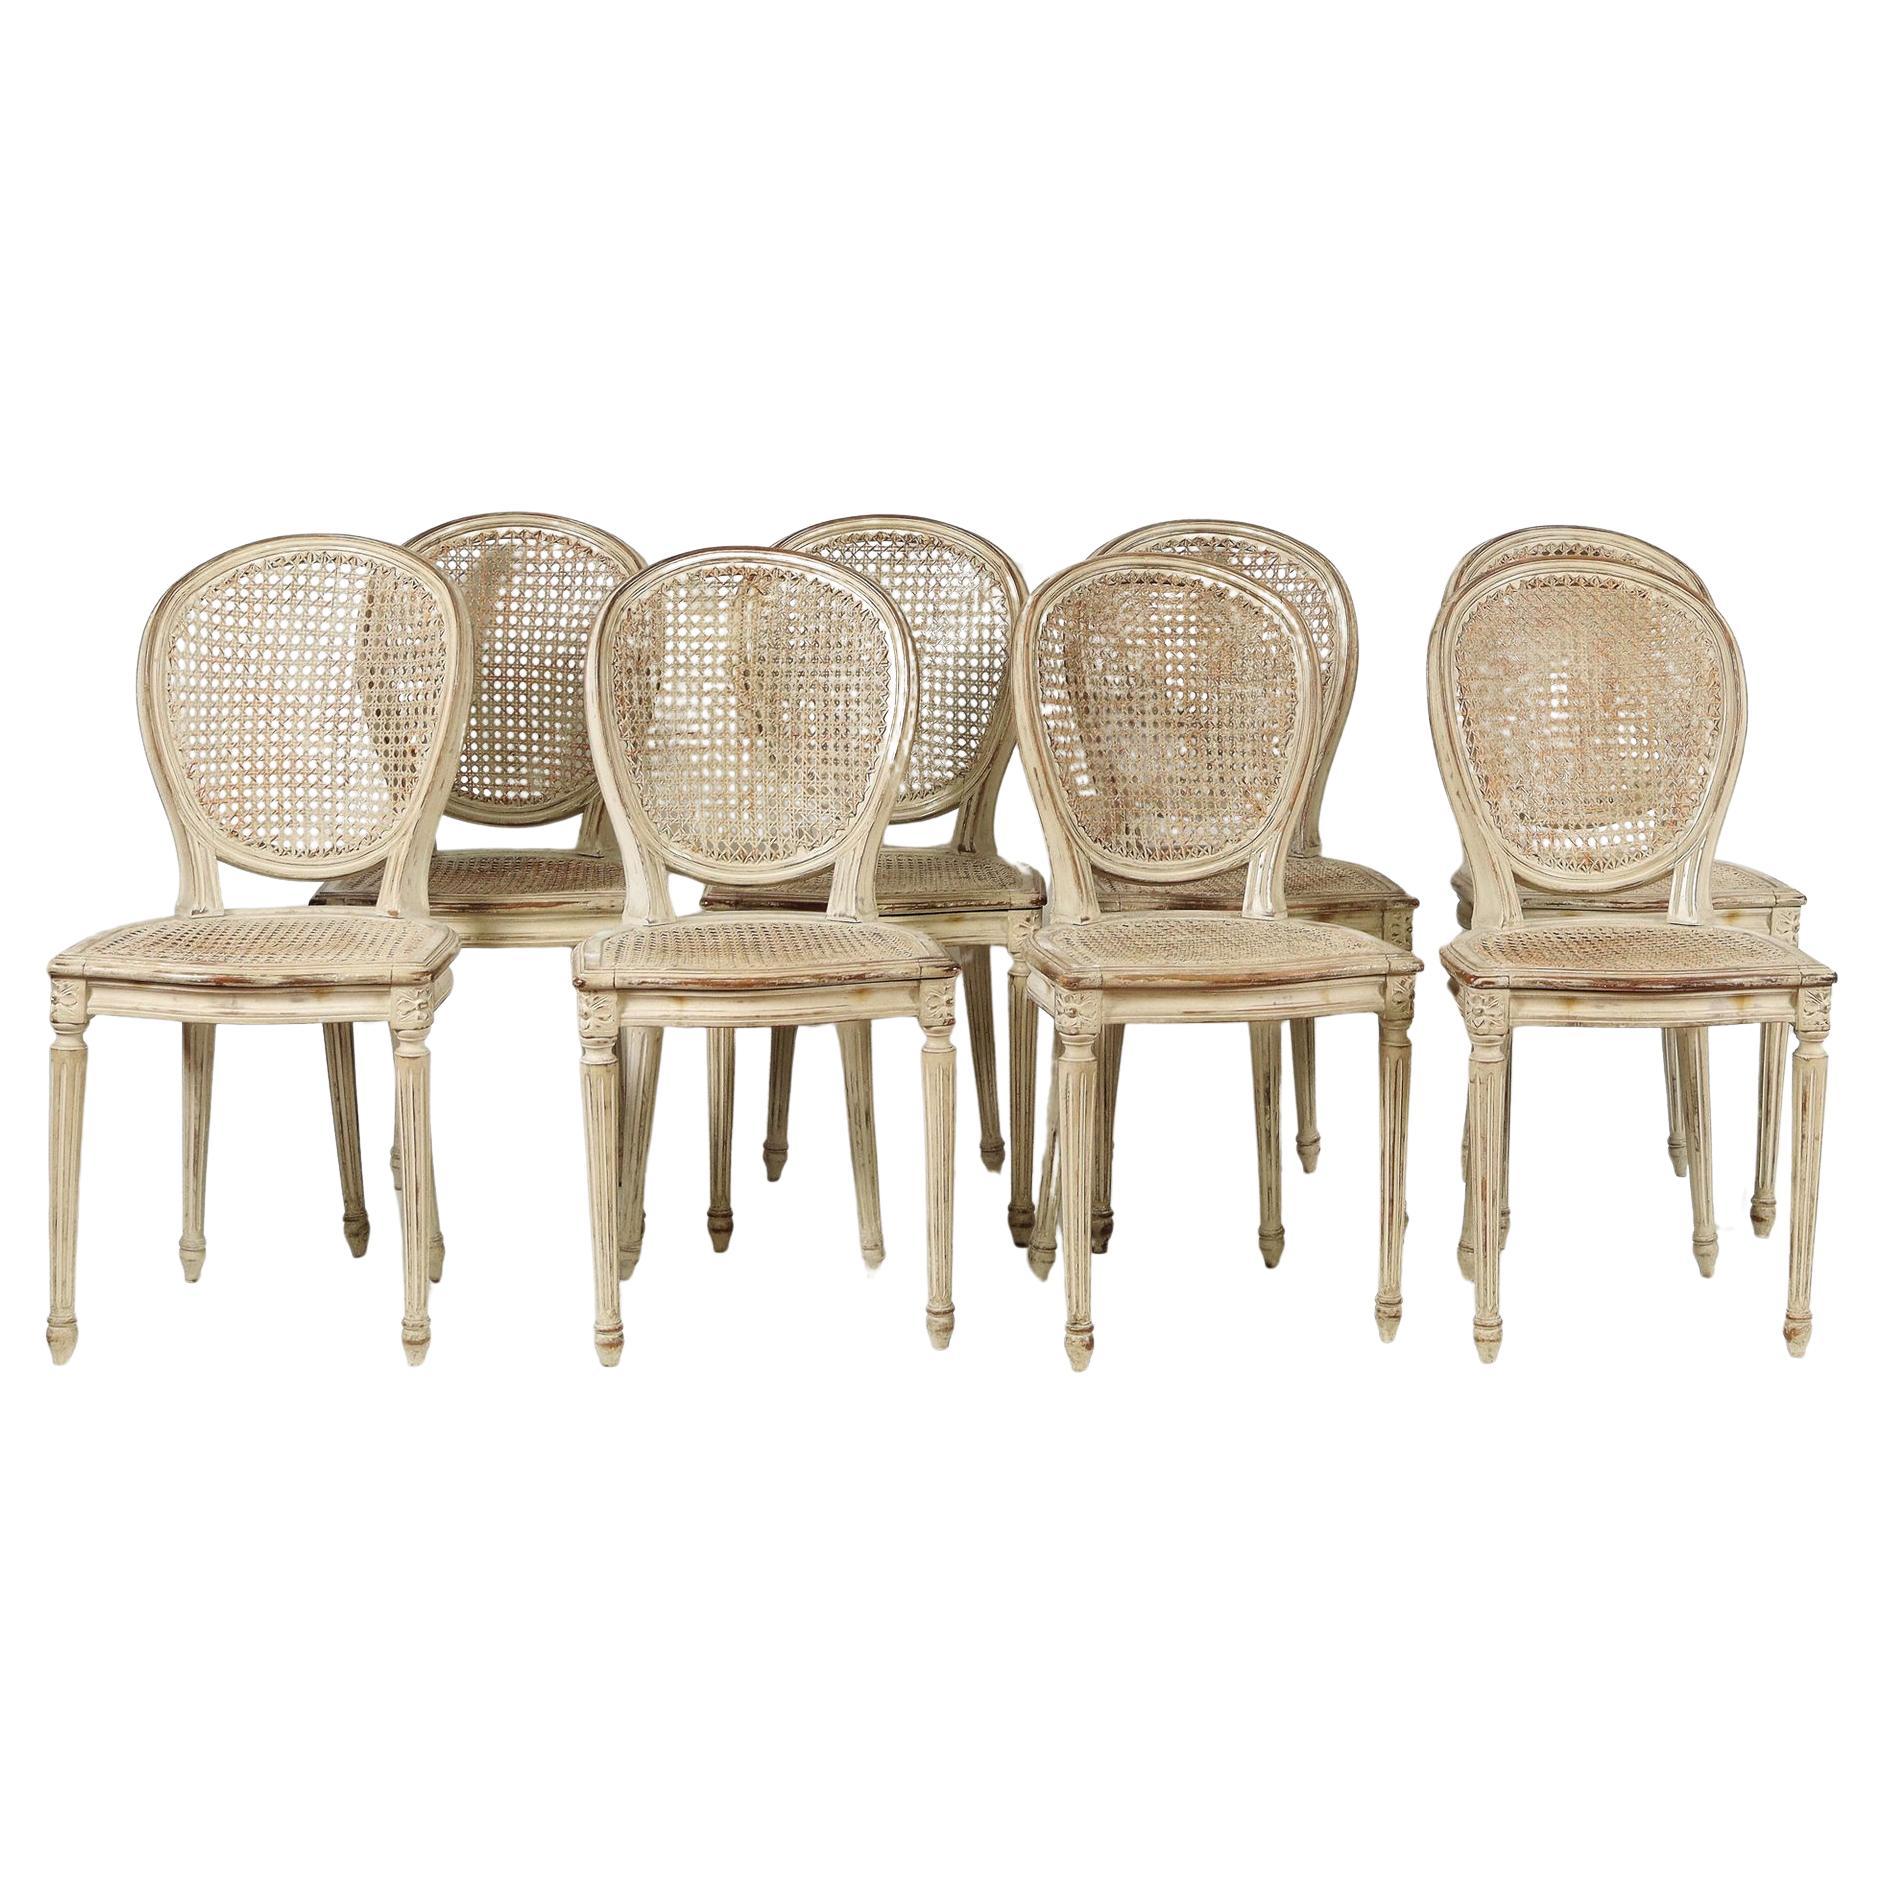 19th Century French Hand Carved Dining Chairs in Louis XVI Style with Cane Seats For Sale